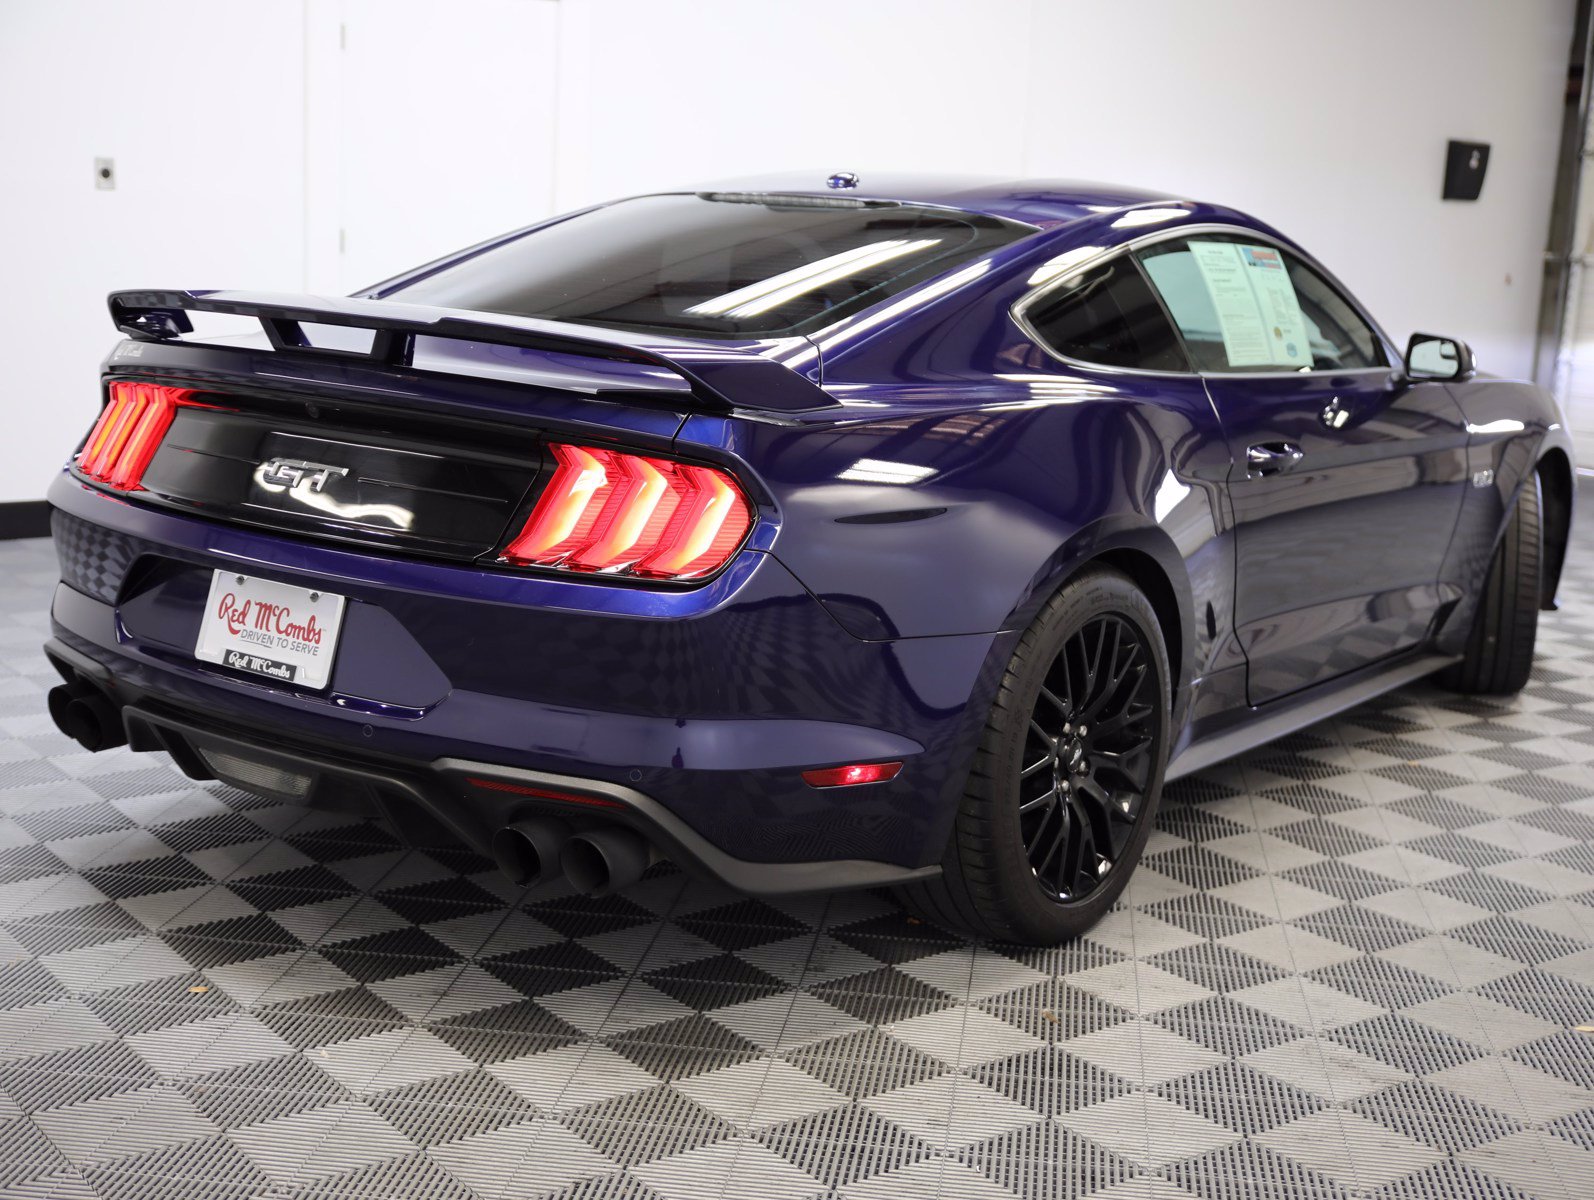 Pre-Owned 2019 Ford Mustang GT Premium 2dr Car in San Antonio #102950A